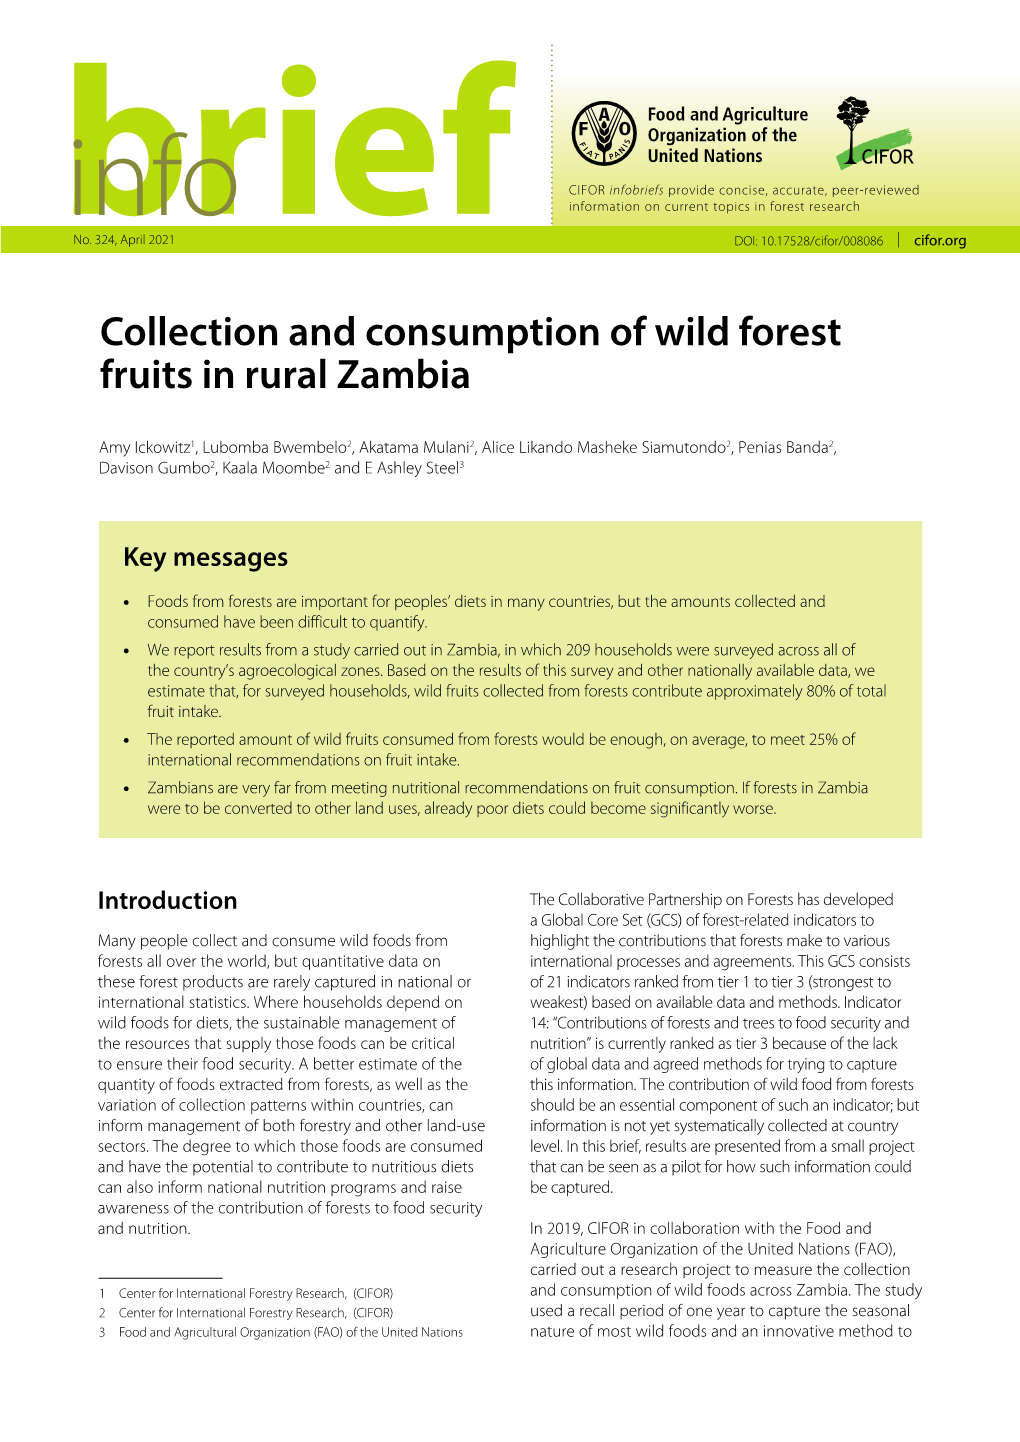 Collection and Consumption of Wild Forest Fruits in Rural Zambia